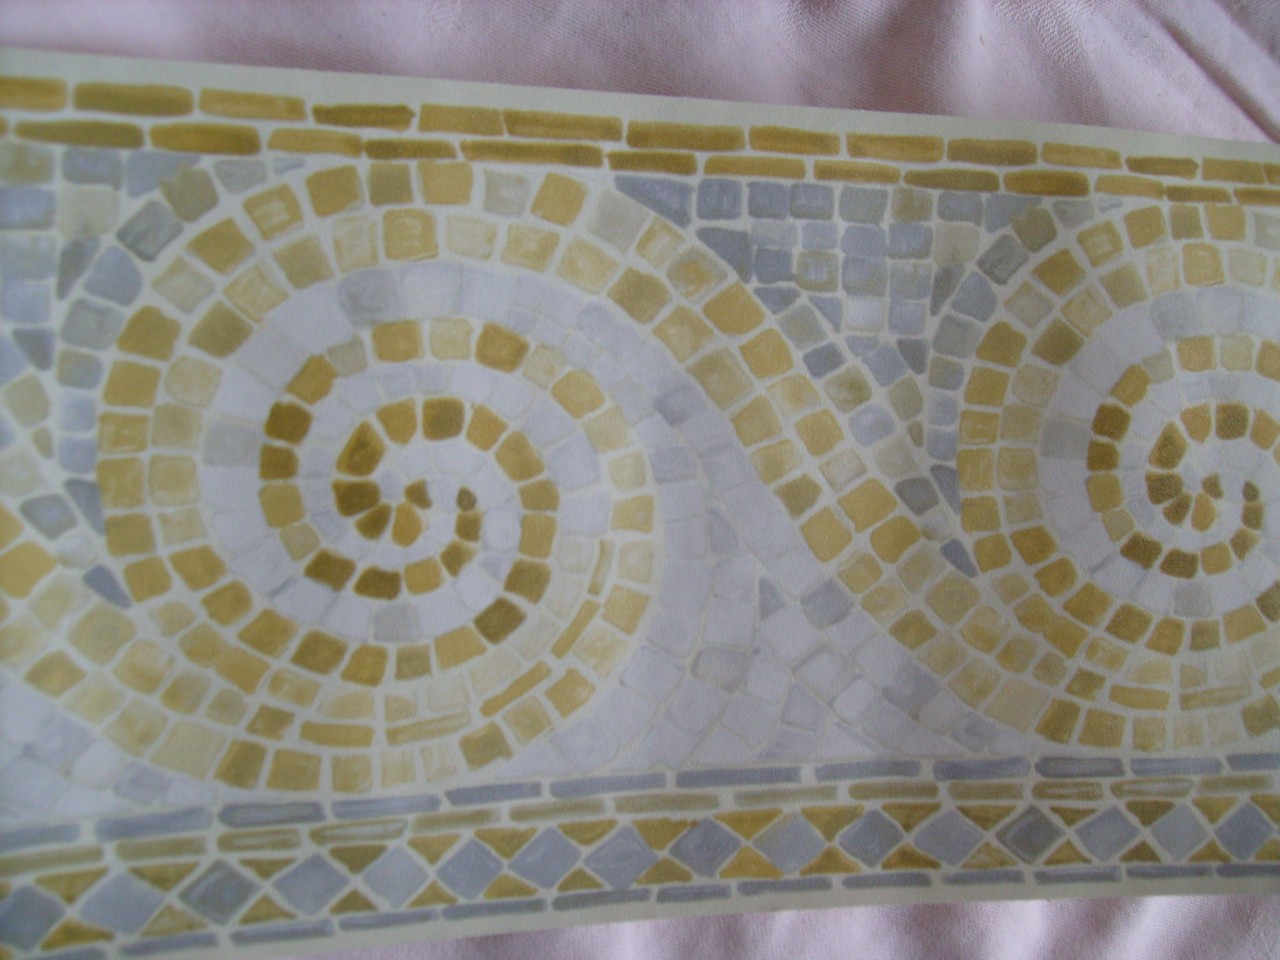 Details about MOSAIC GOLD YELLOW GREY COLOROLL WALLPAPER BORDERS BN 1280x960